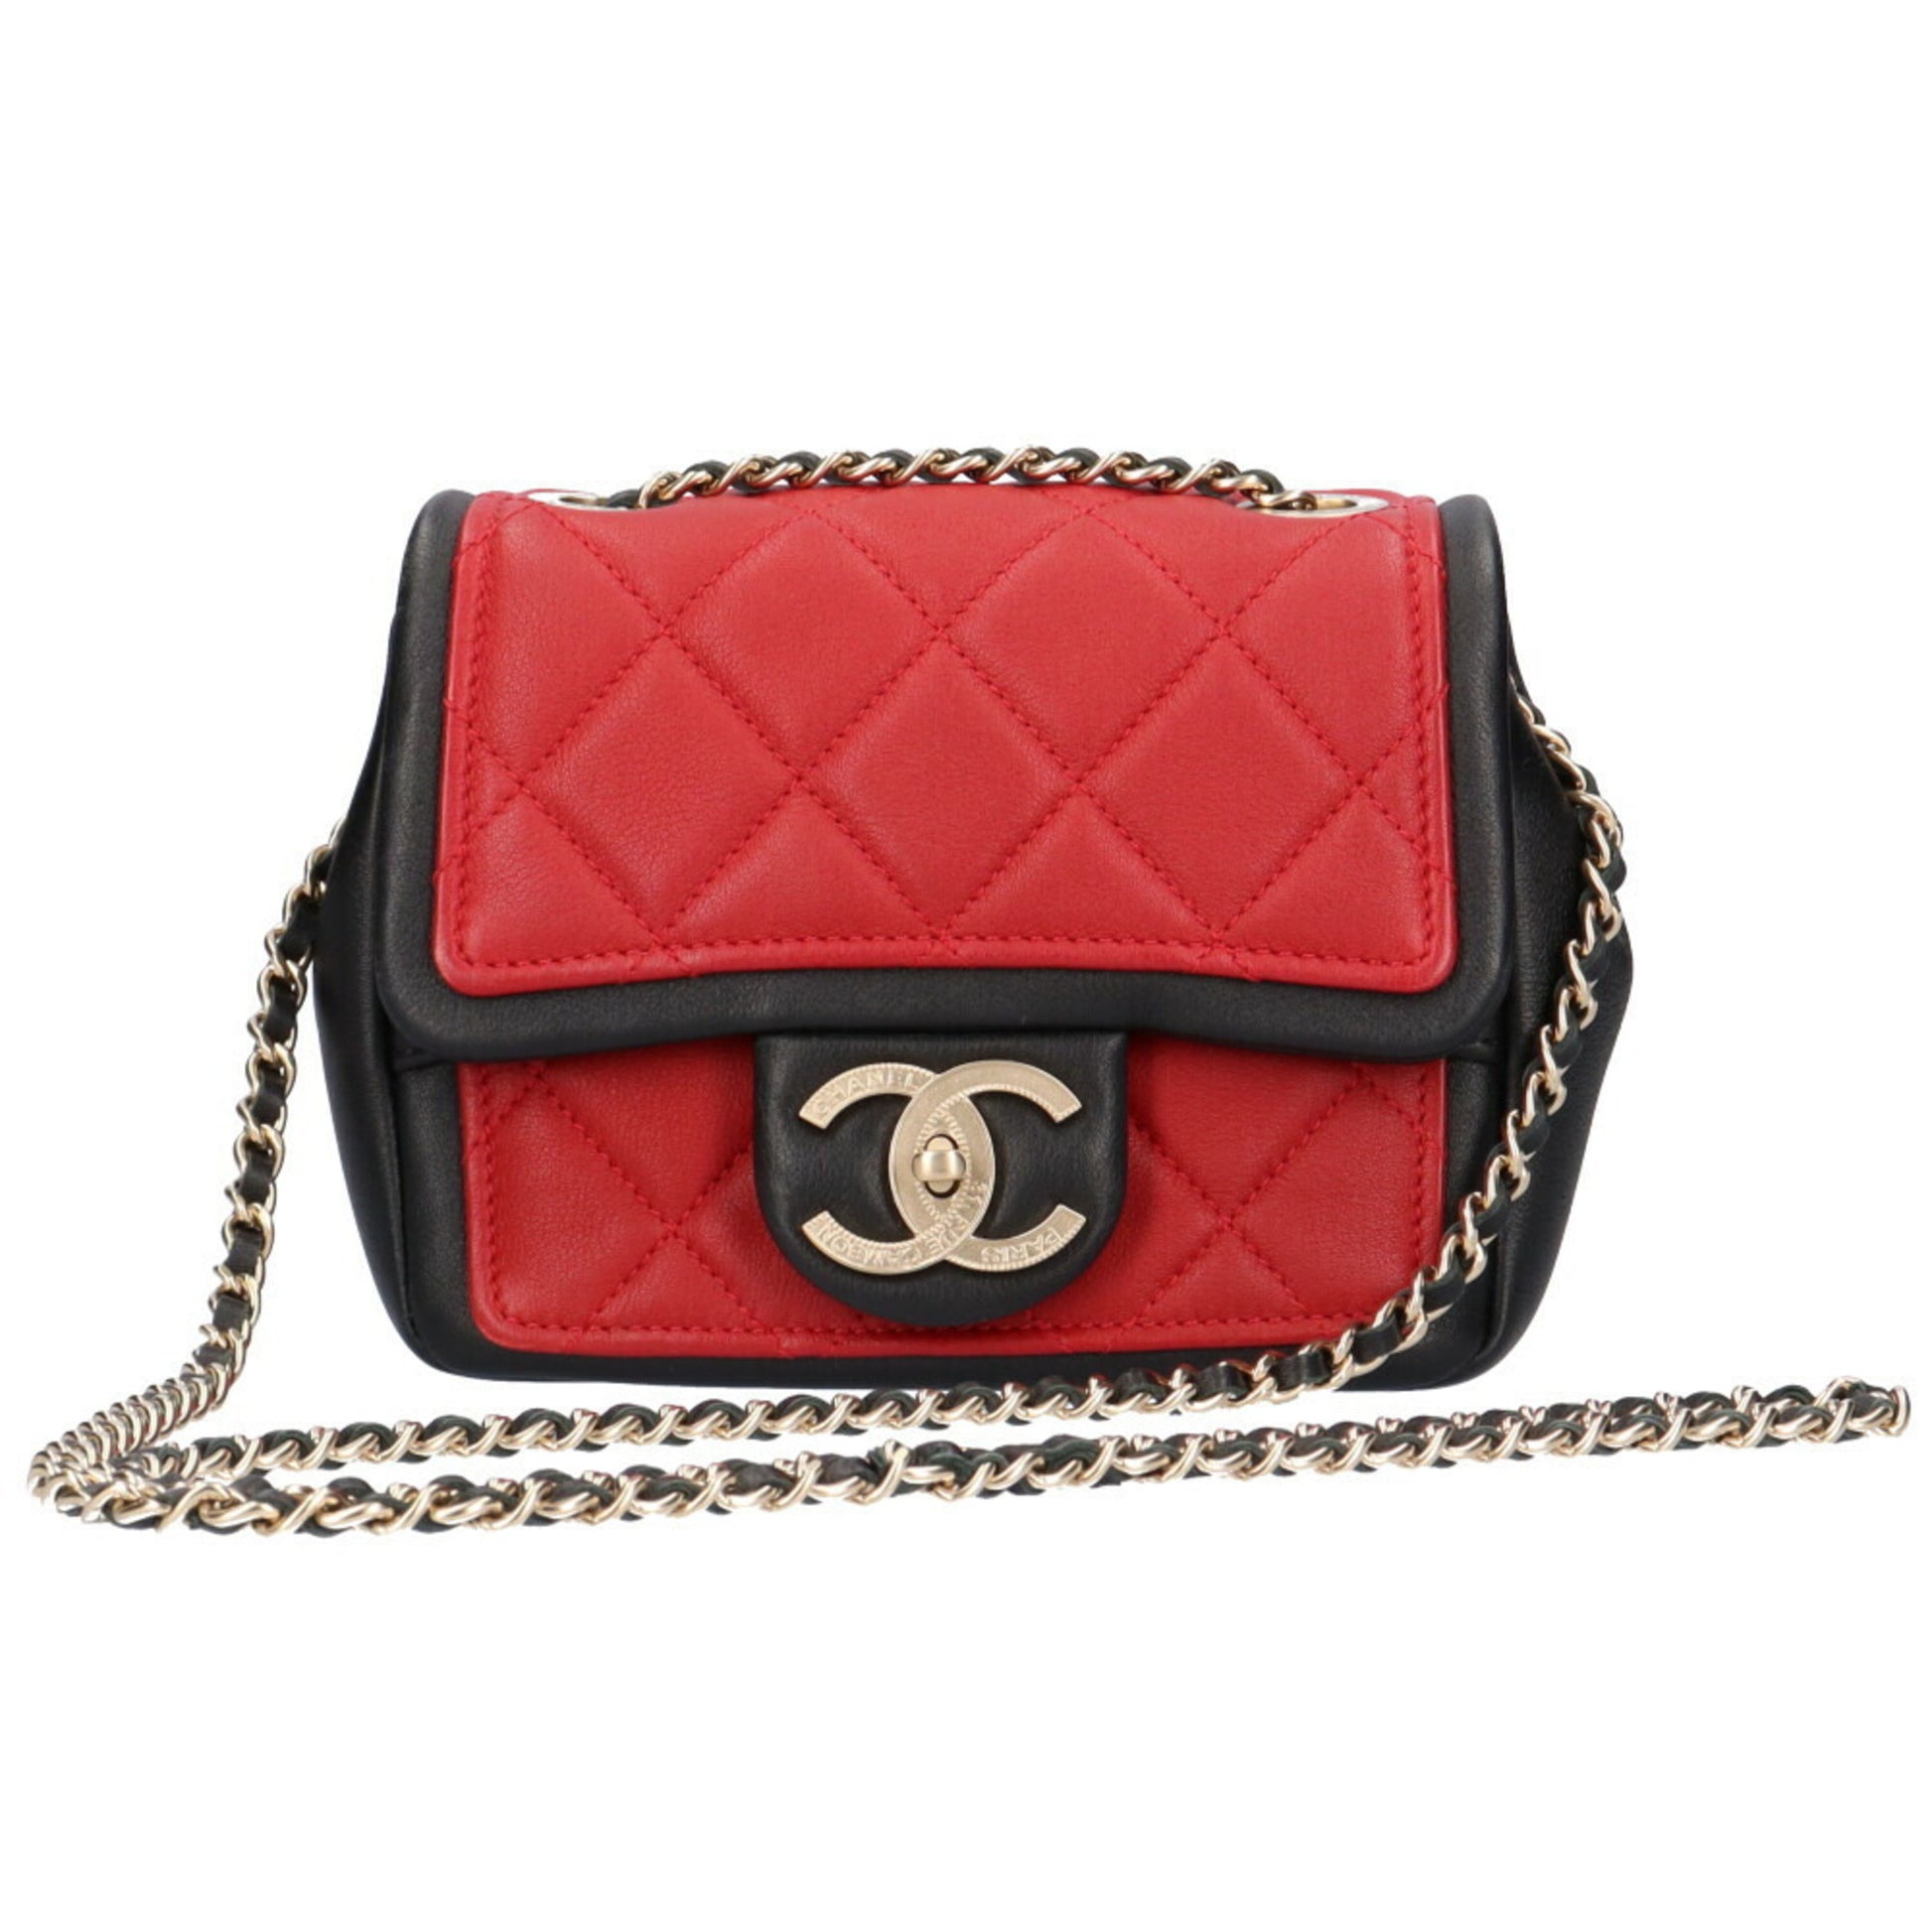 CHANEL CHANEL 2way Shoulder Bag A92991 Calfskin leather Red Used